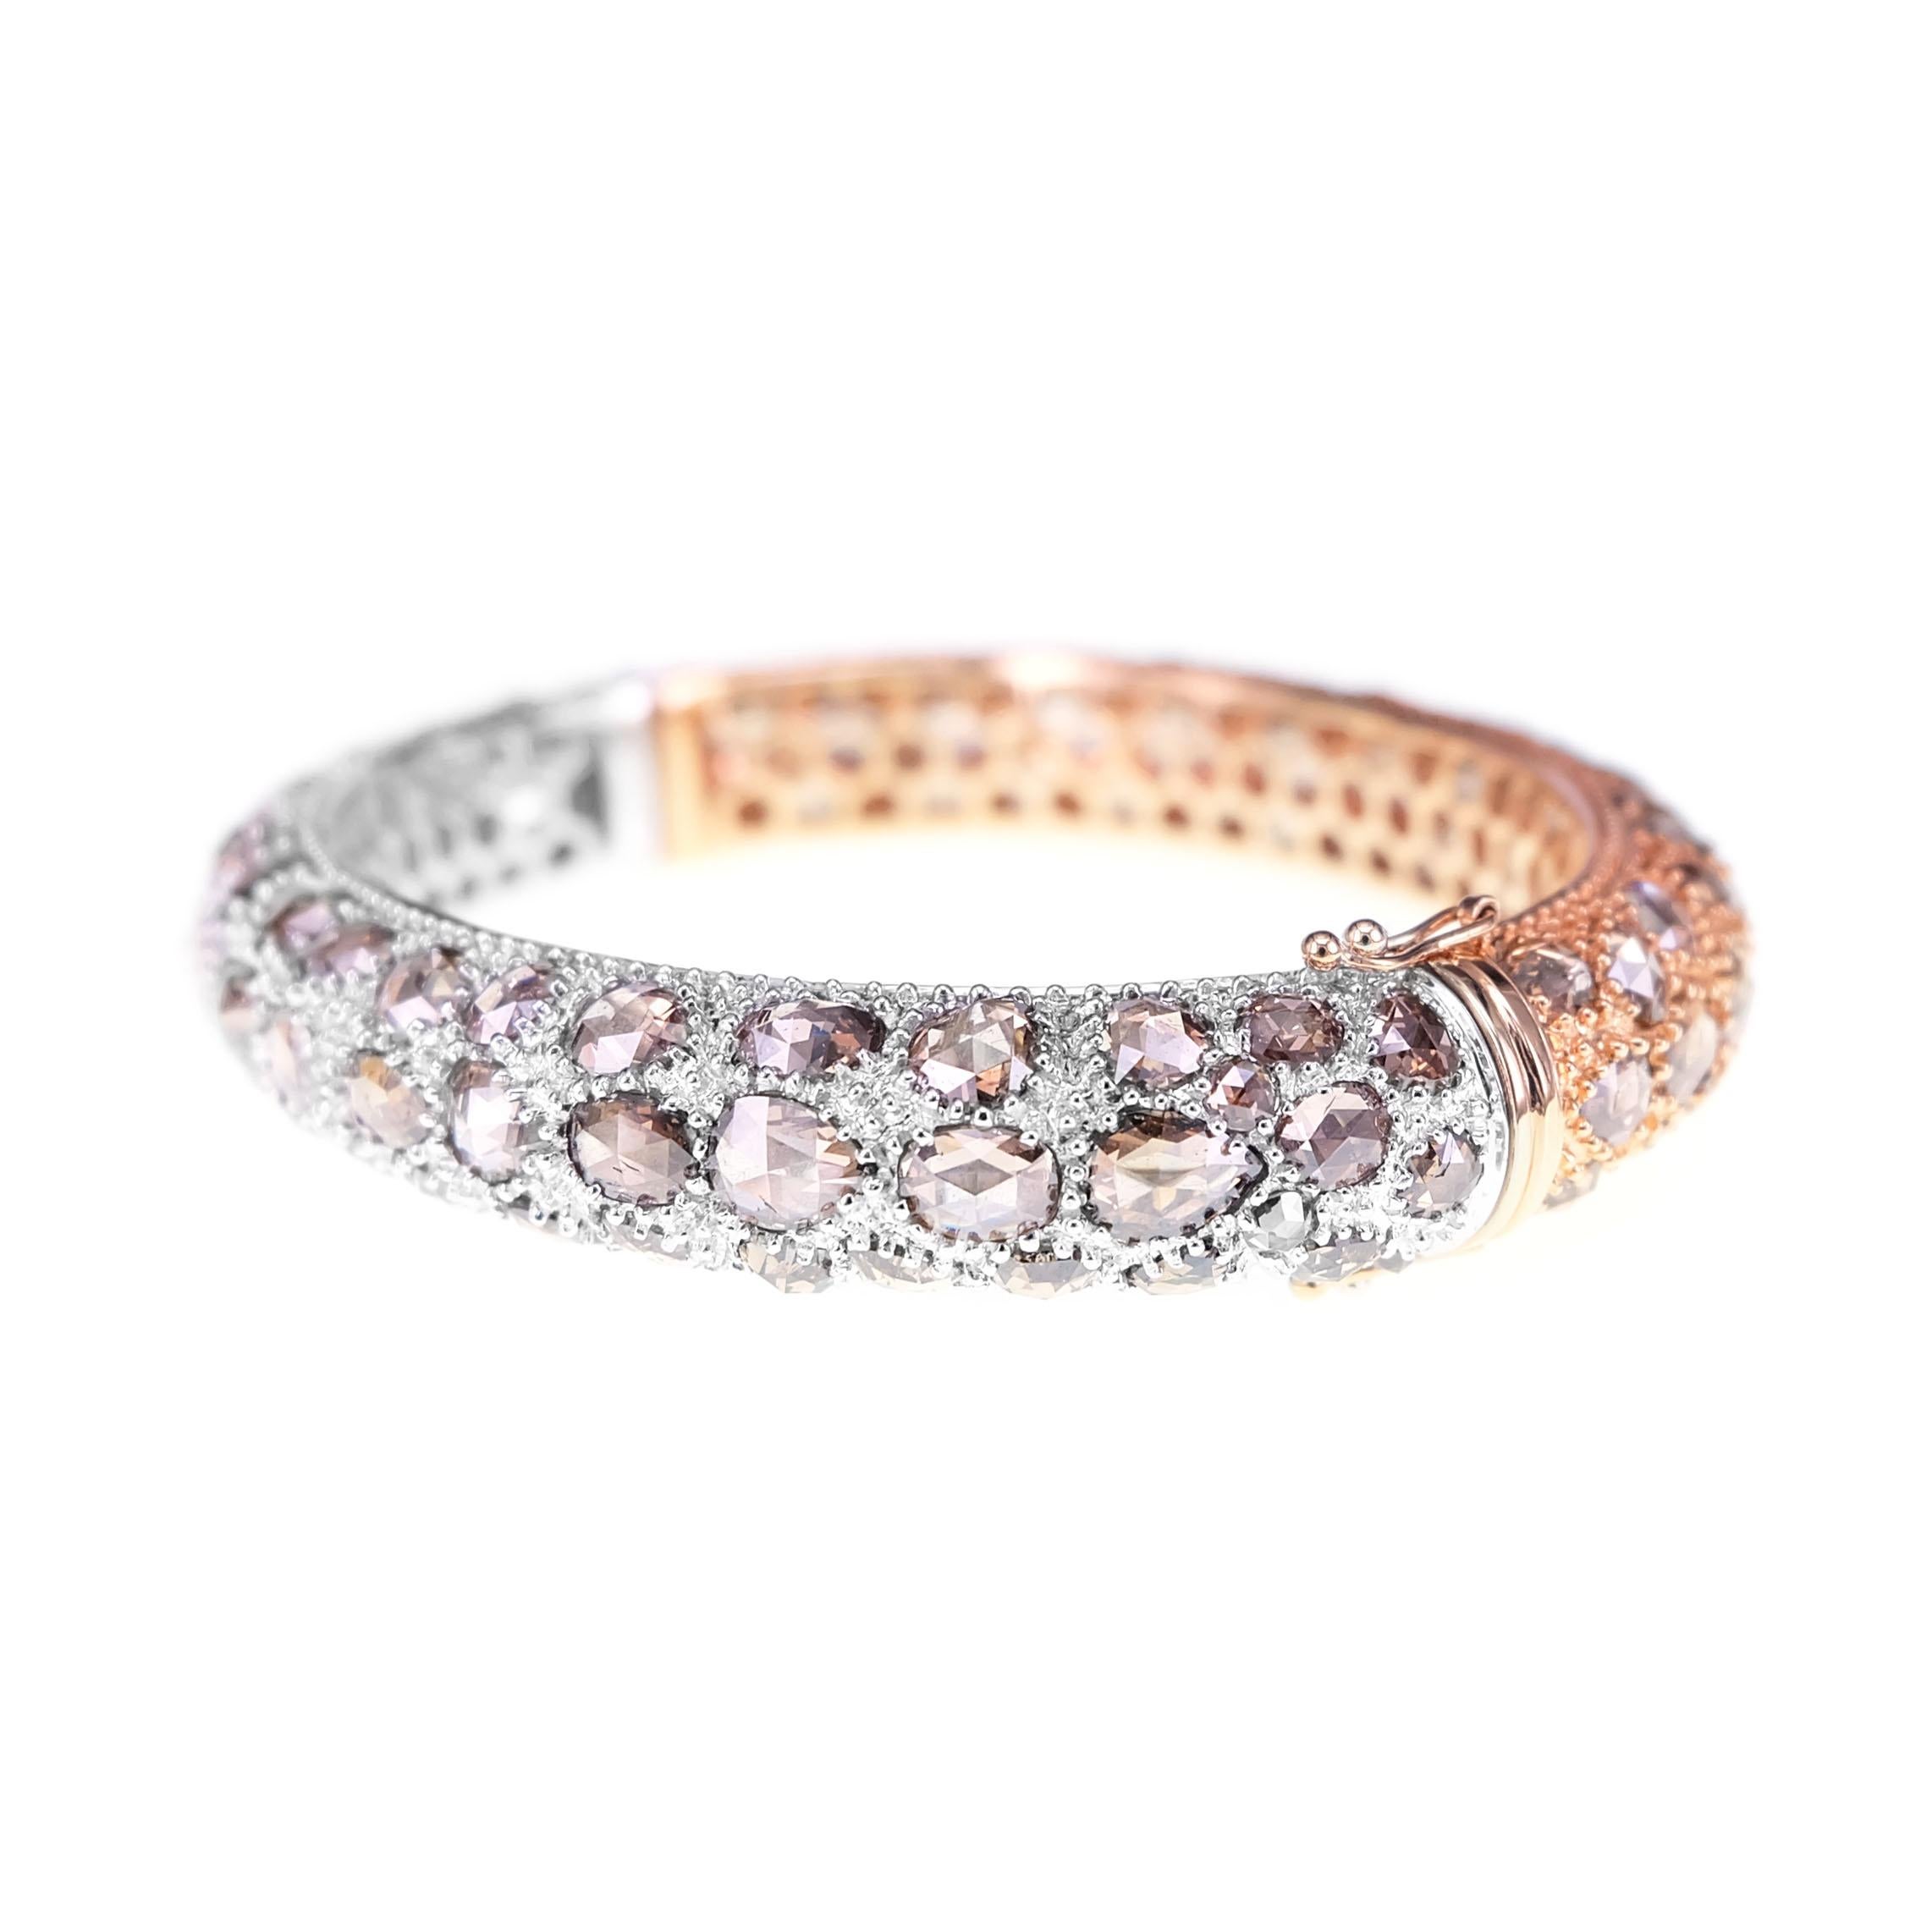 25.12 carats of brown rose cut are set in this multi purpose bangle. On one side, the diamonds are set in rose gold and on the other side on white gold. Depending on the mood and dress, you can use the bangle in both rose and white gold. 
The